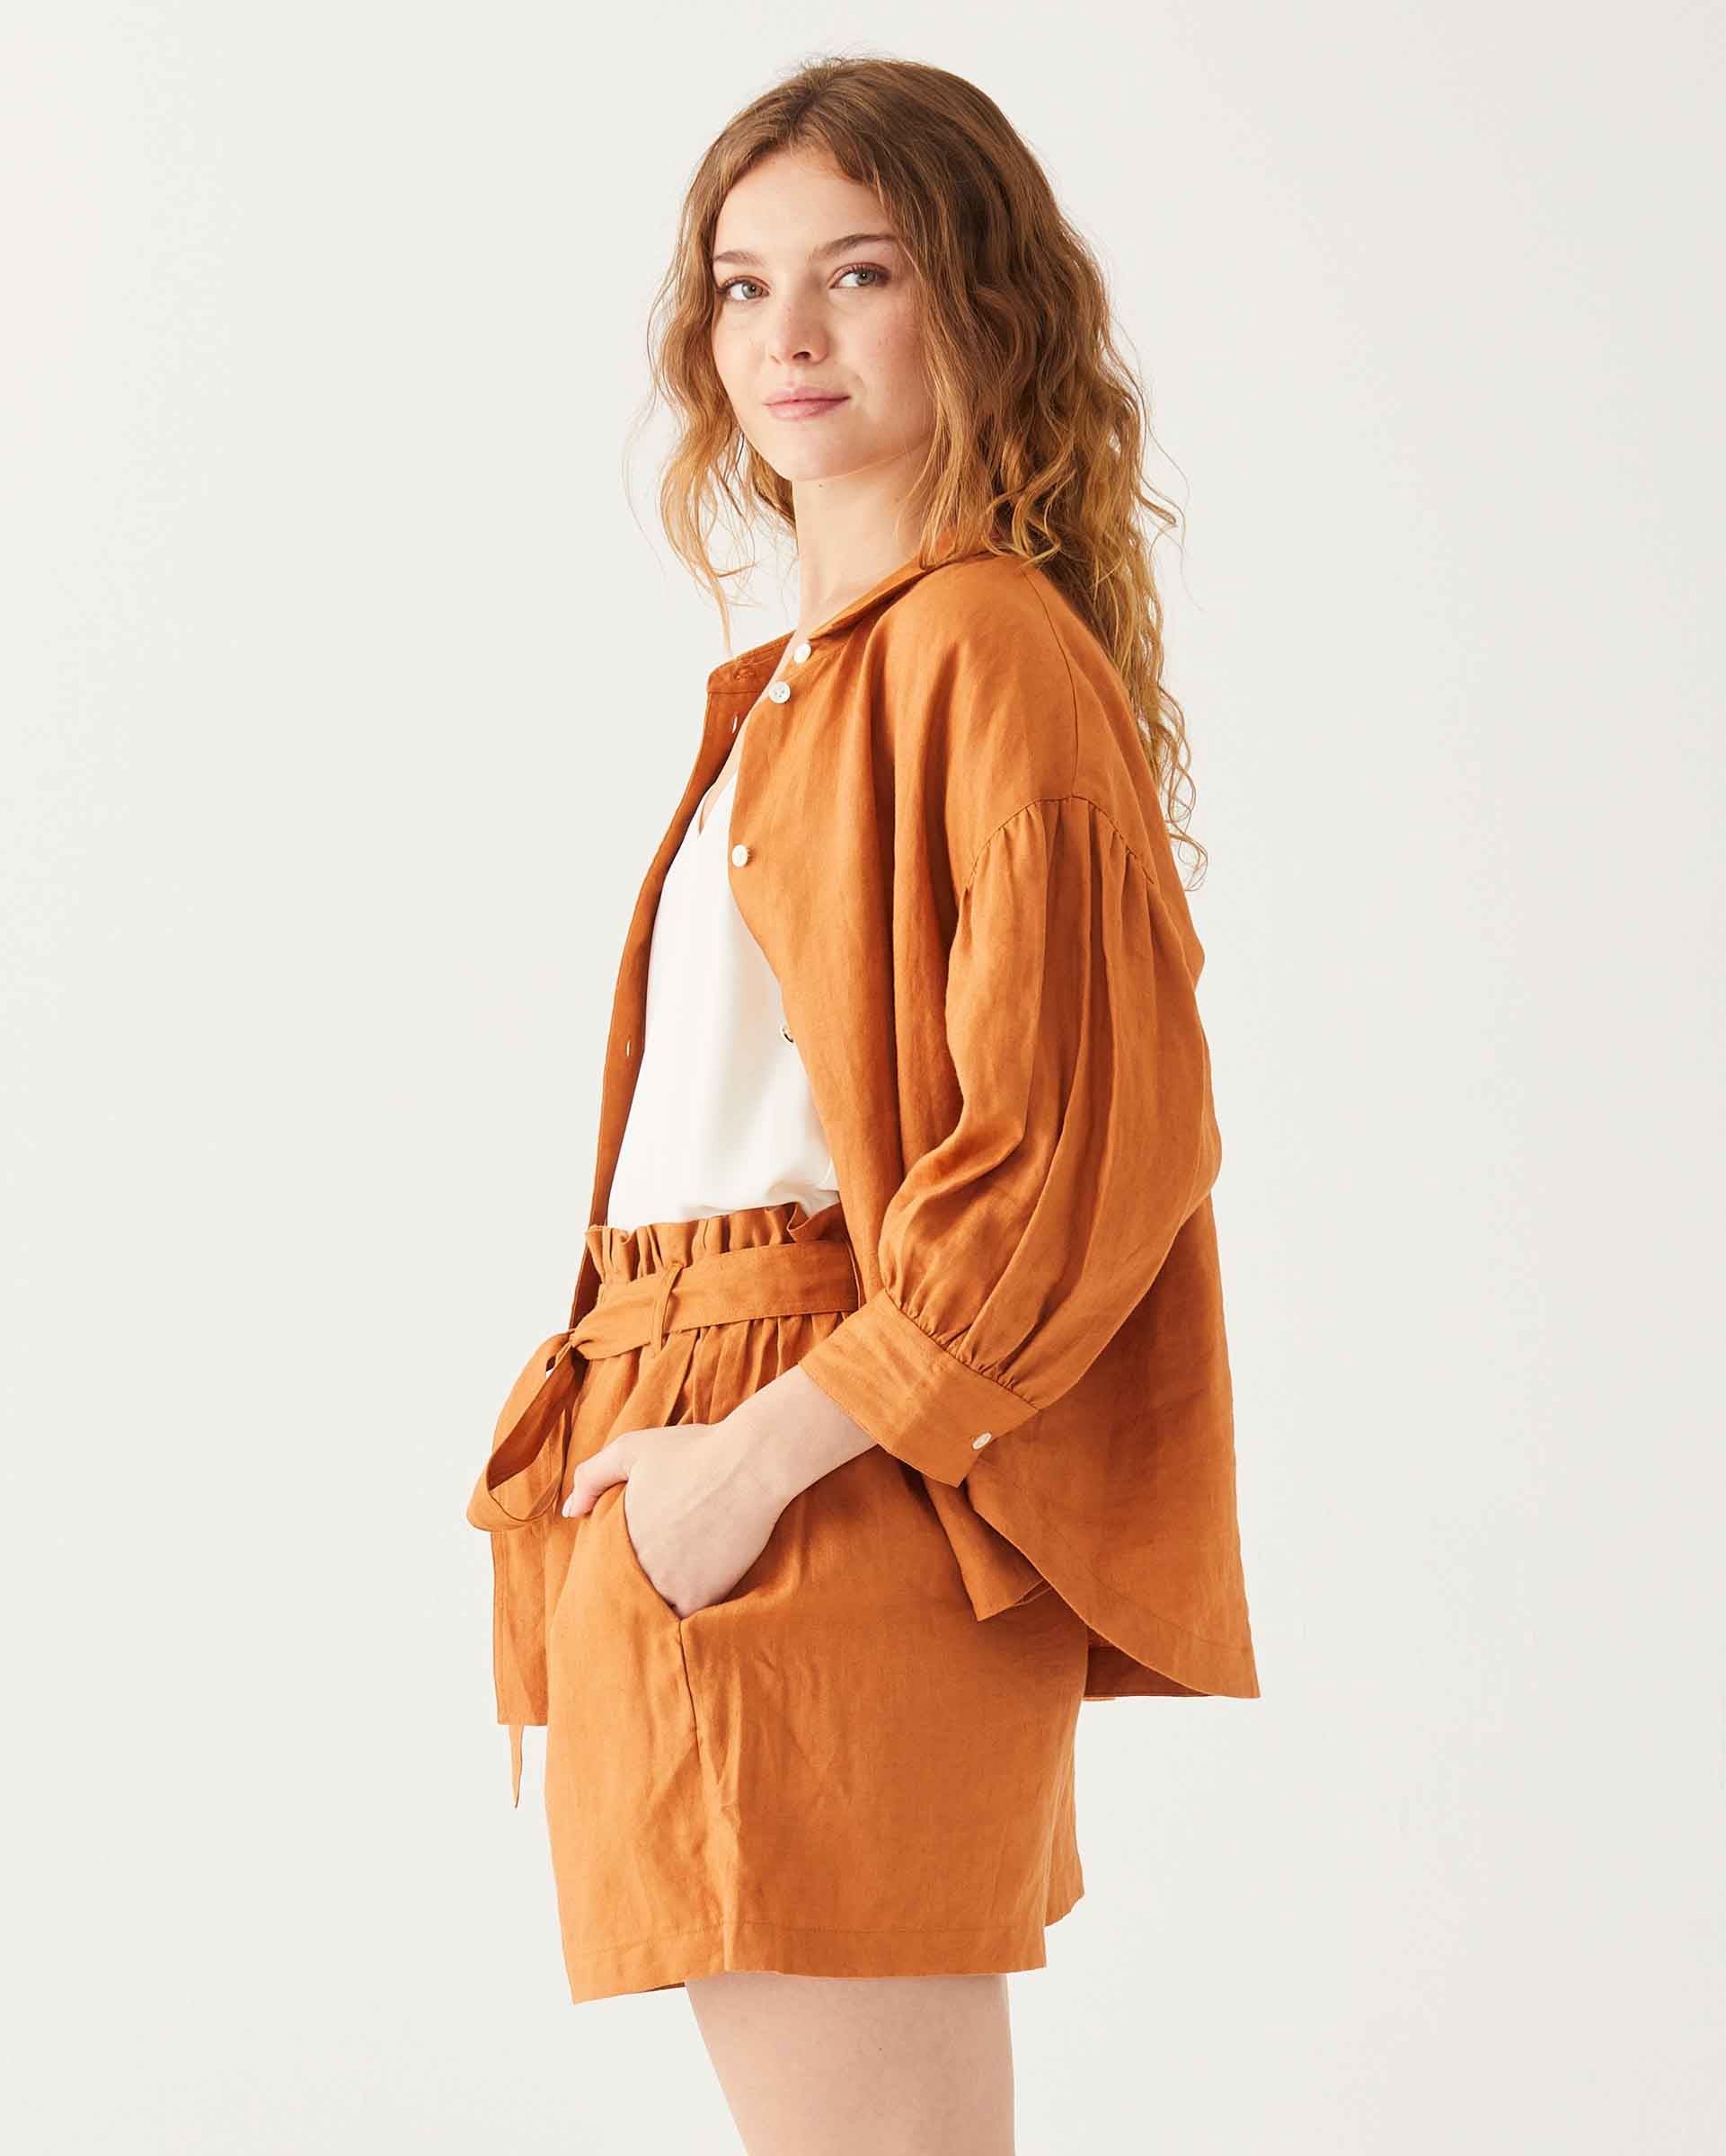 Women's Daytime Clay Lightweight-Linen Relaxed Fit Lucca Shirt with Classic Collar and Cuffs (Pair with Billie Shorts) Open Side View